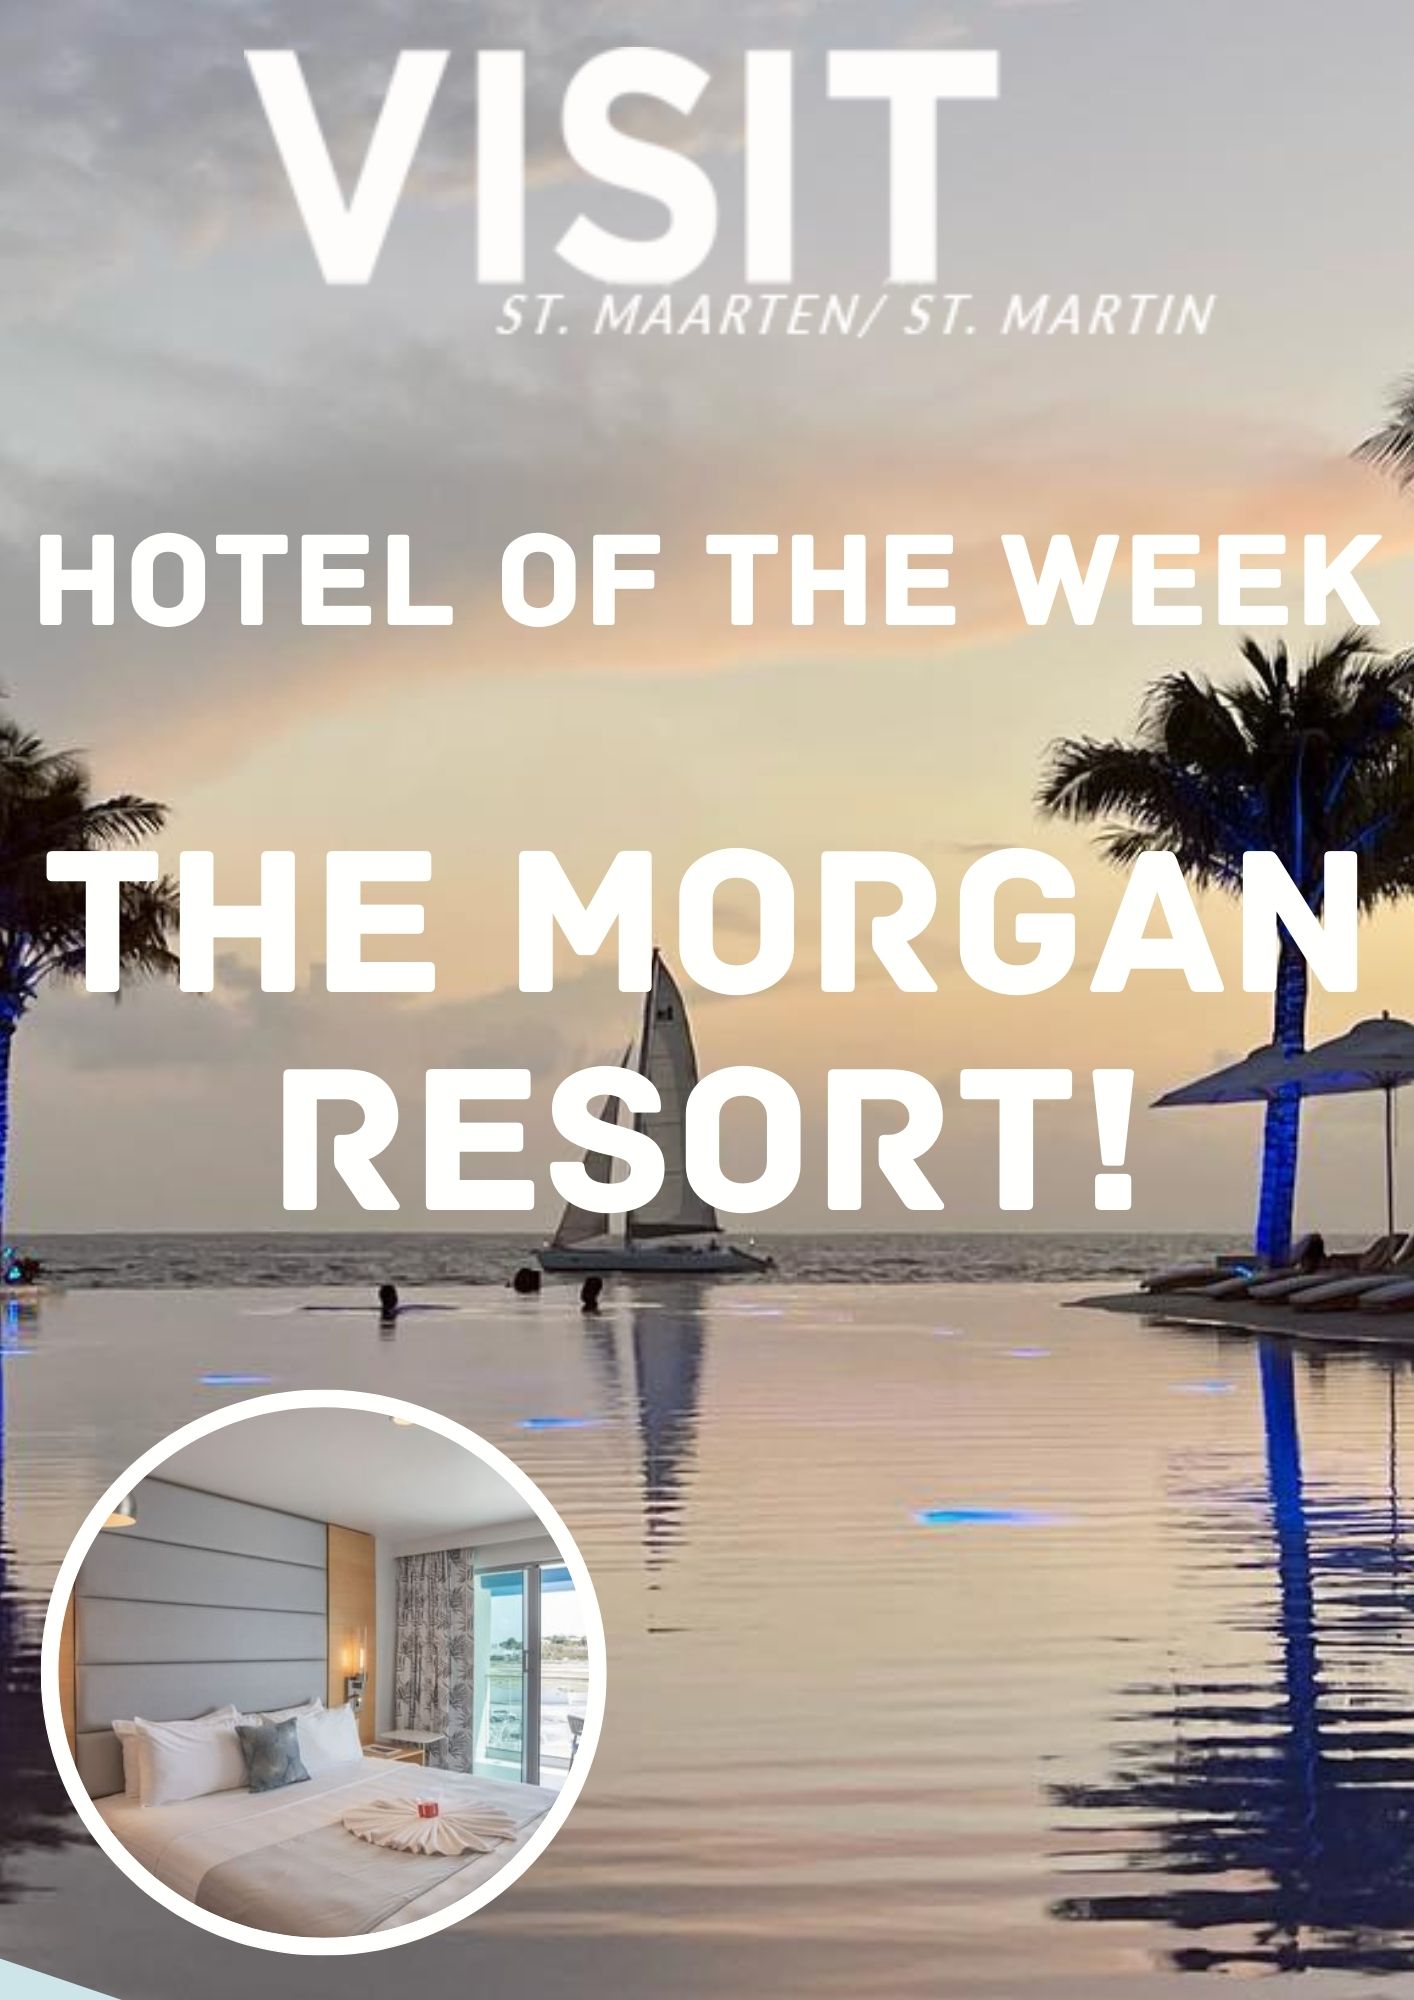 Hotel of the week